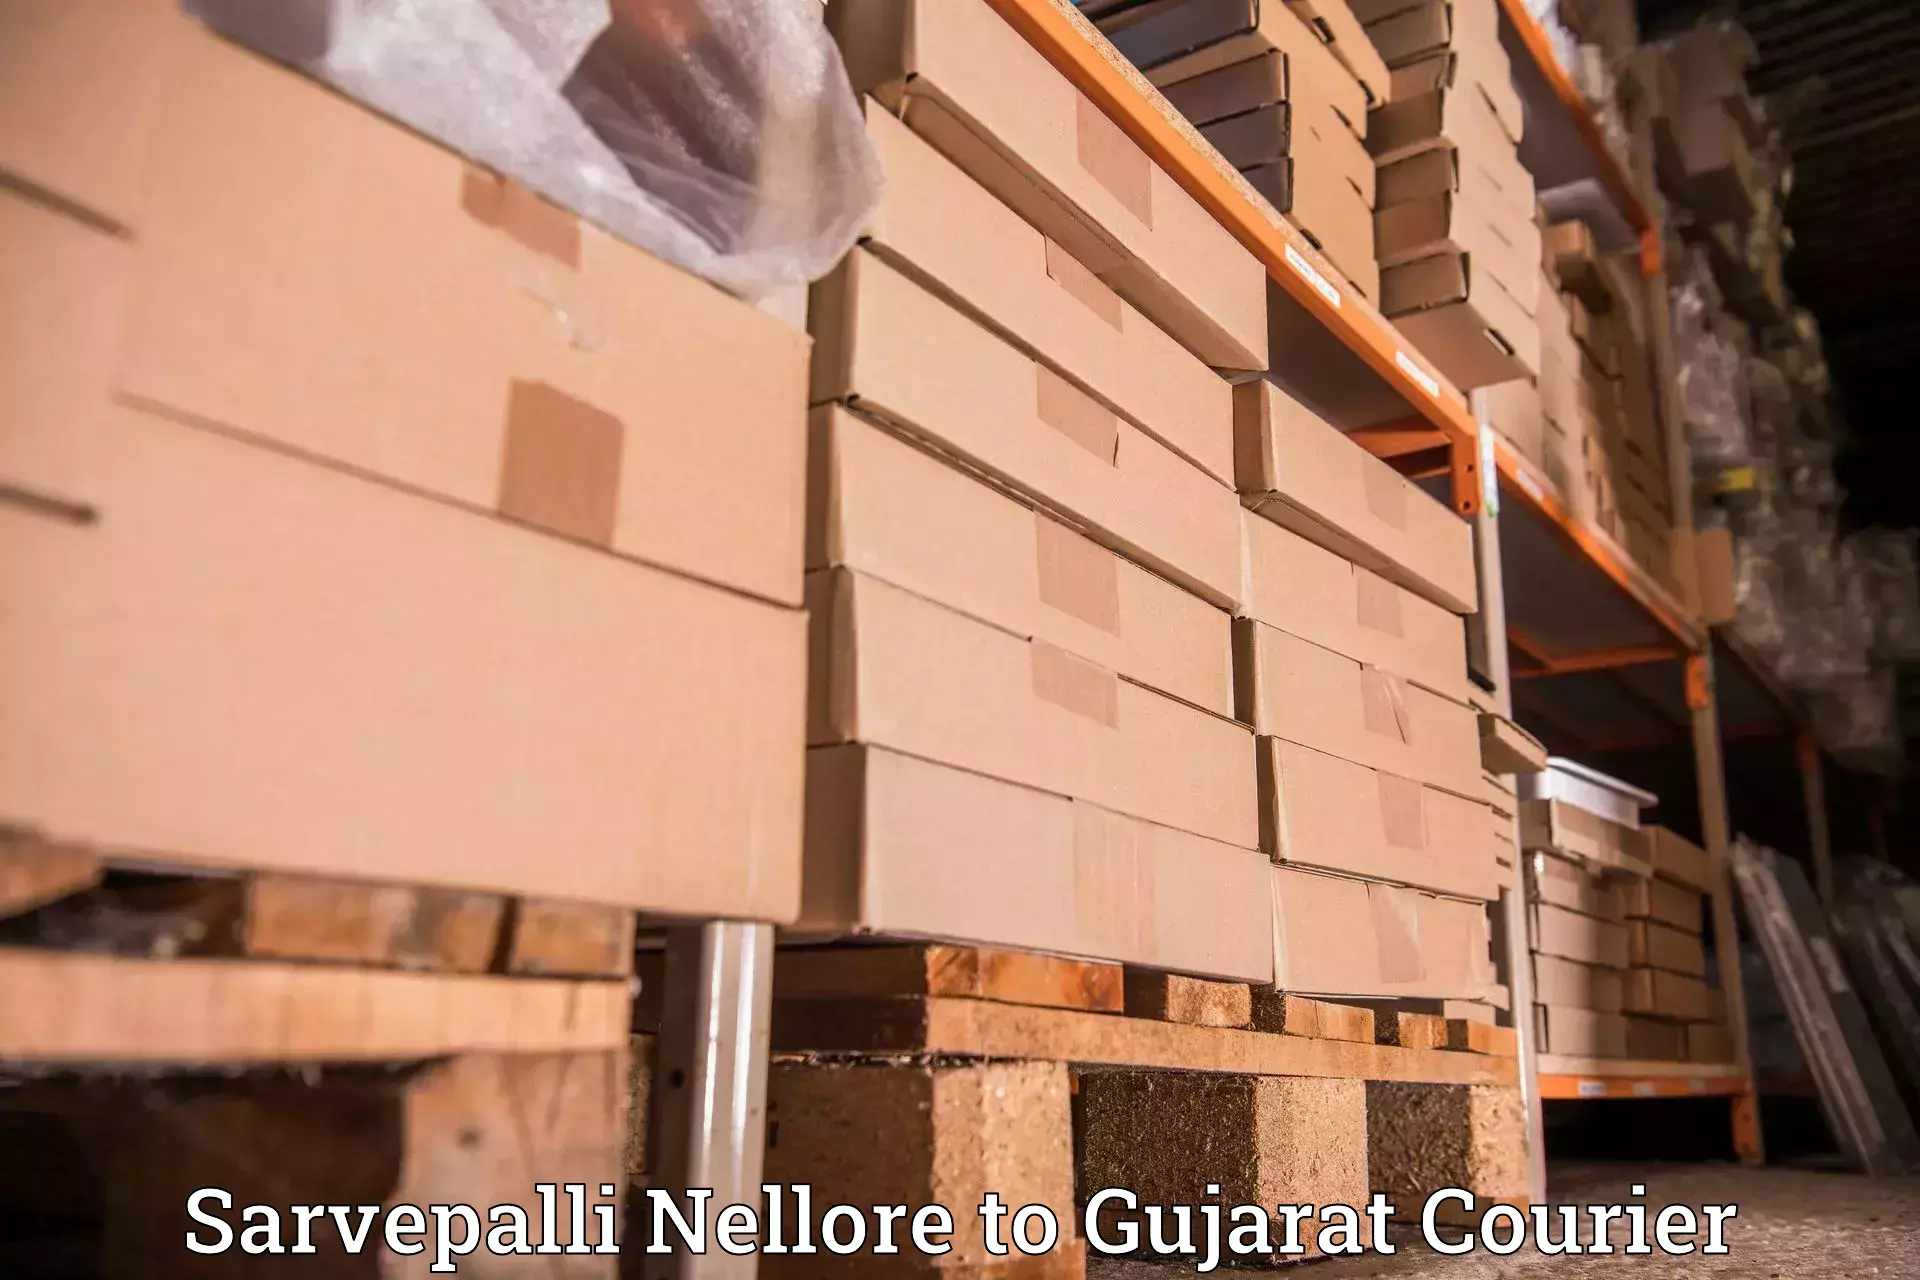 Next-day delivery options in Sarvepalli Nellore to Bhesan